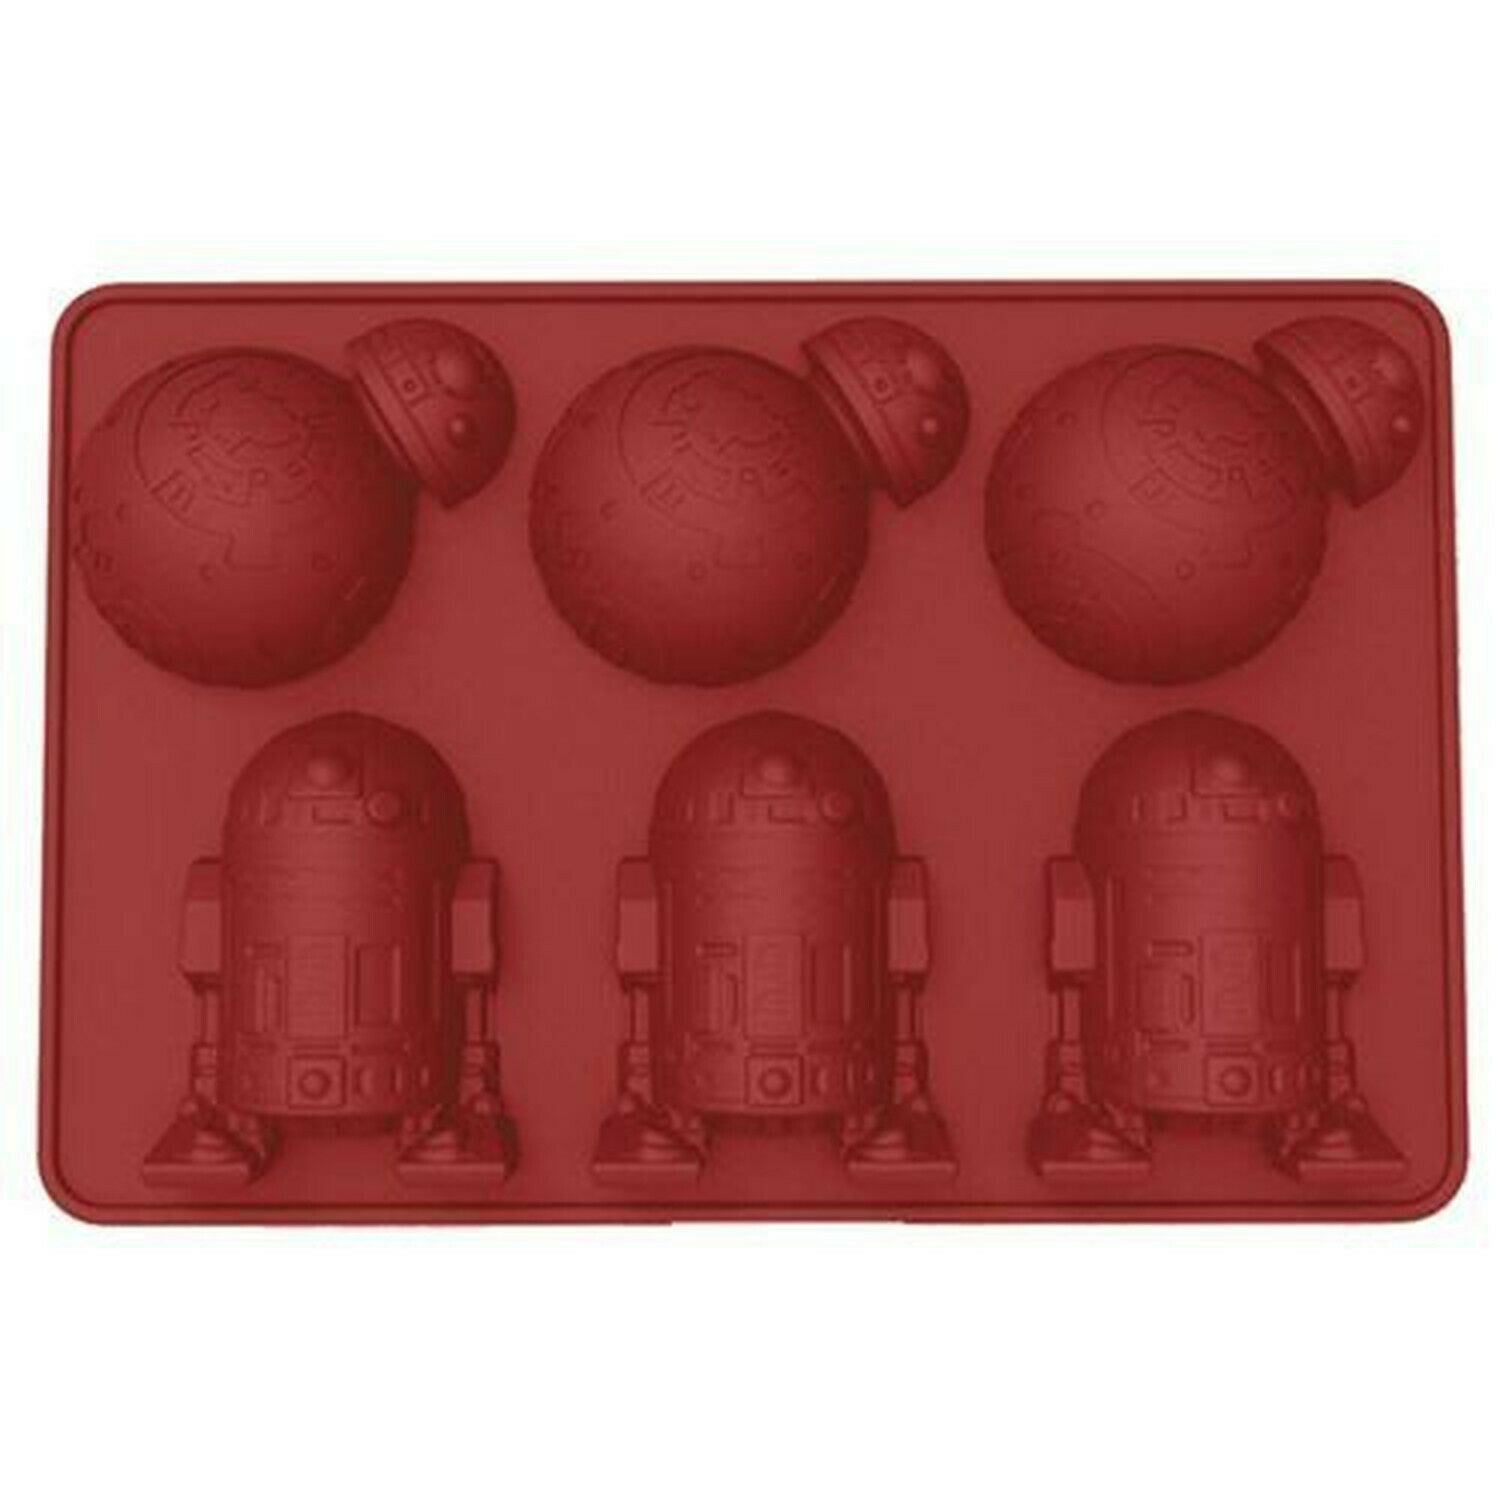 Star Wars SILICONE ICE CUBE TRAY R2-D2 and BB-8 Droid Cold Drink Molds